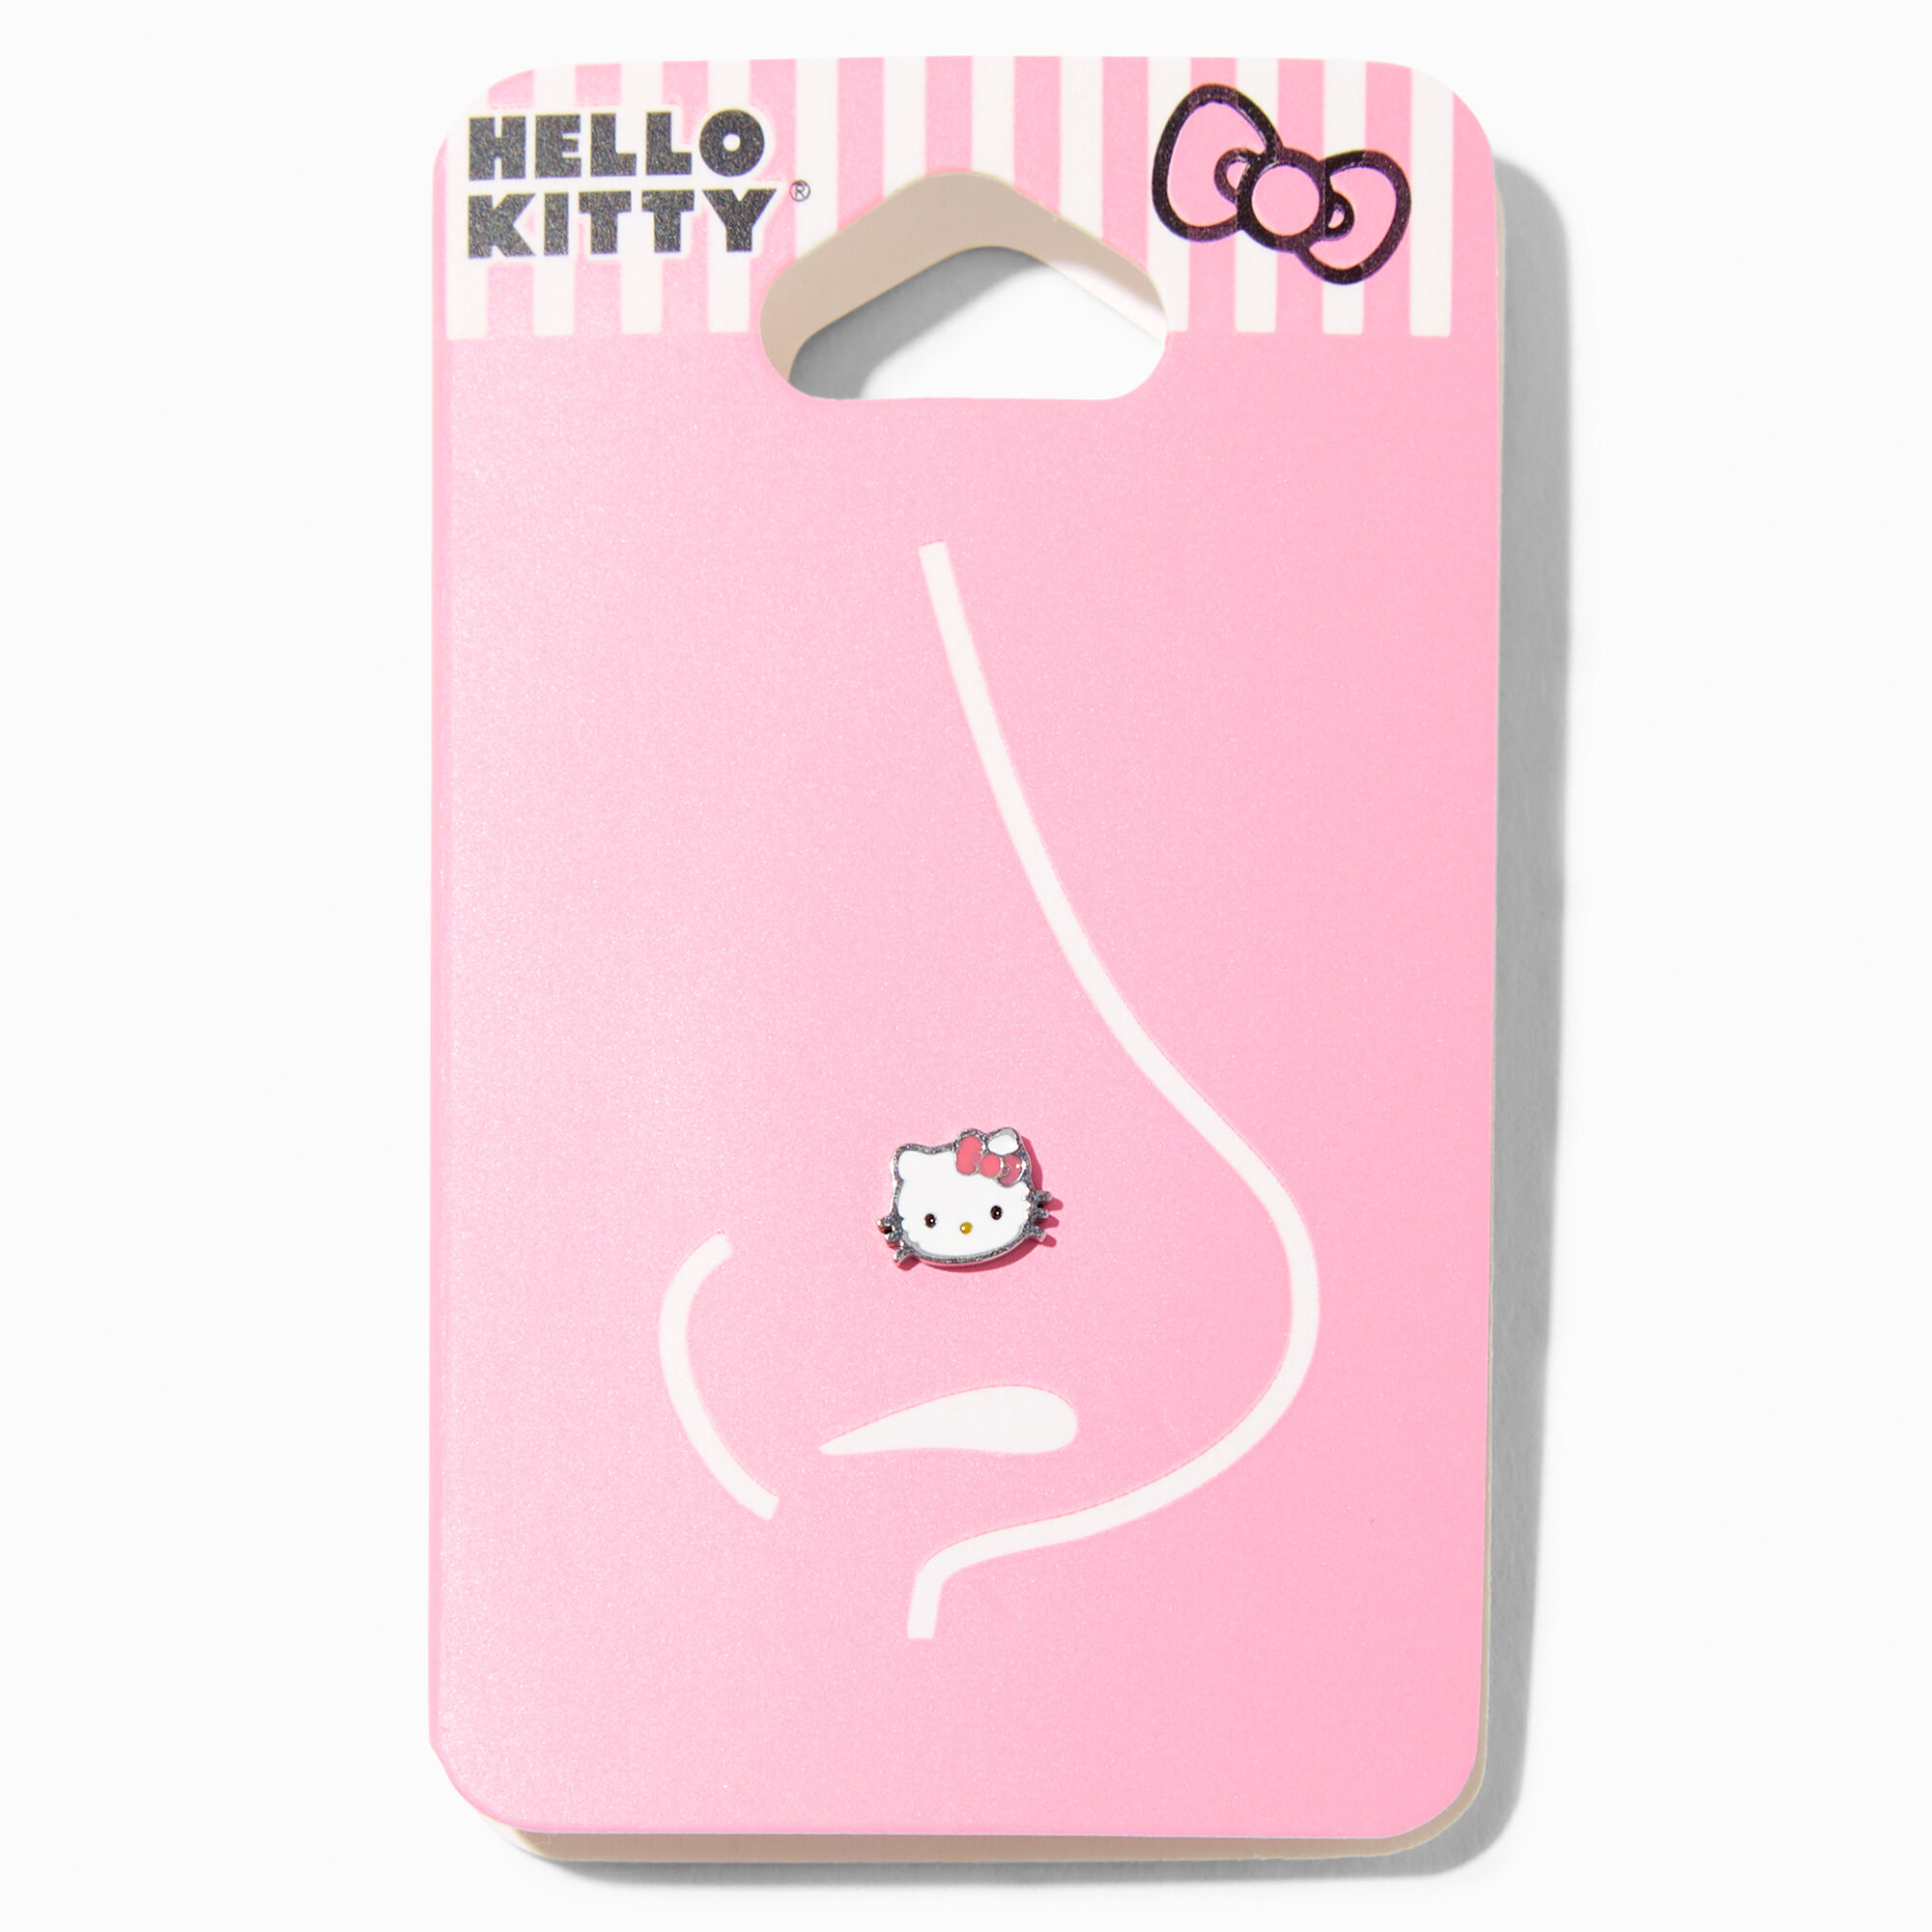 View Claires Hello Kitty Enamel Face 20G Nose Stud Pink information